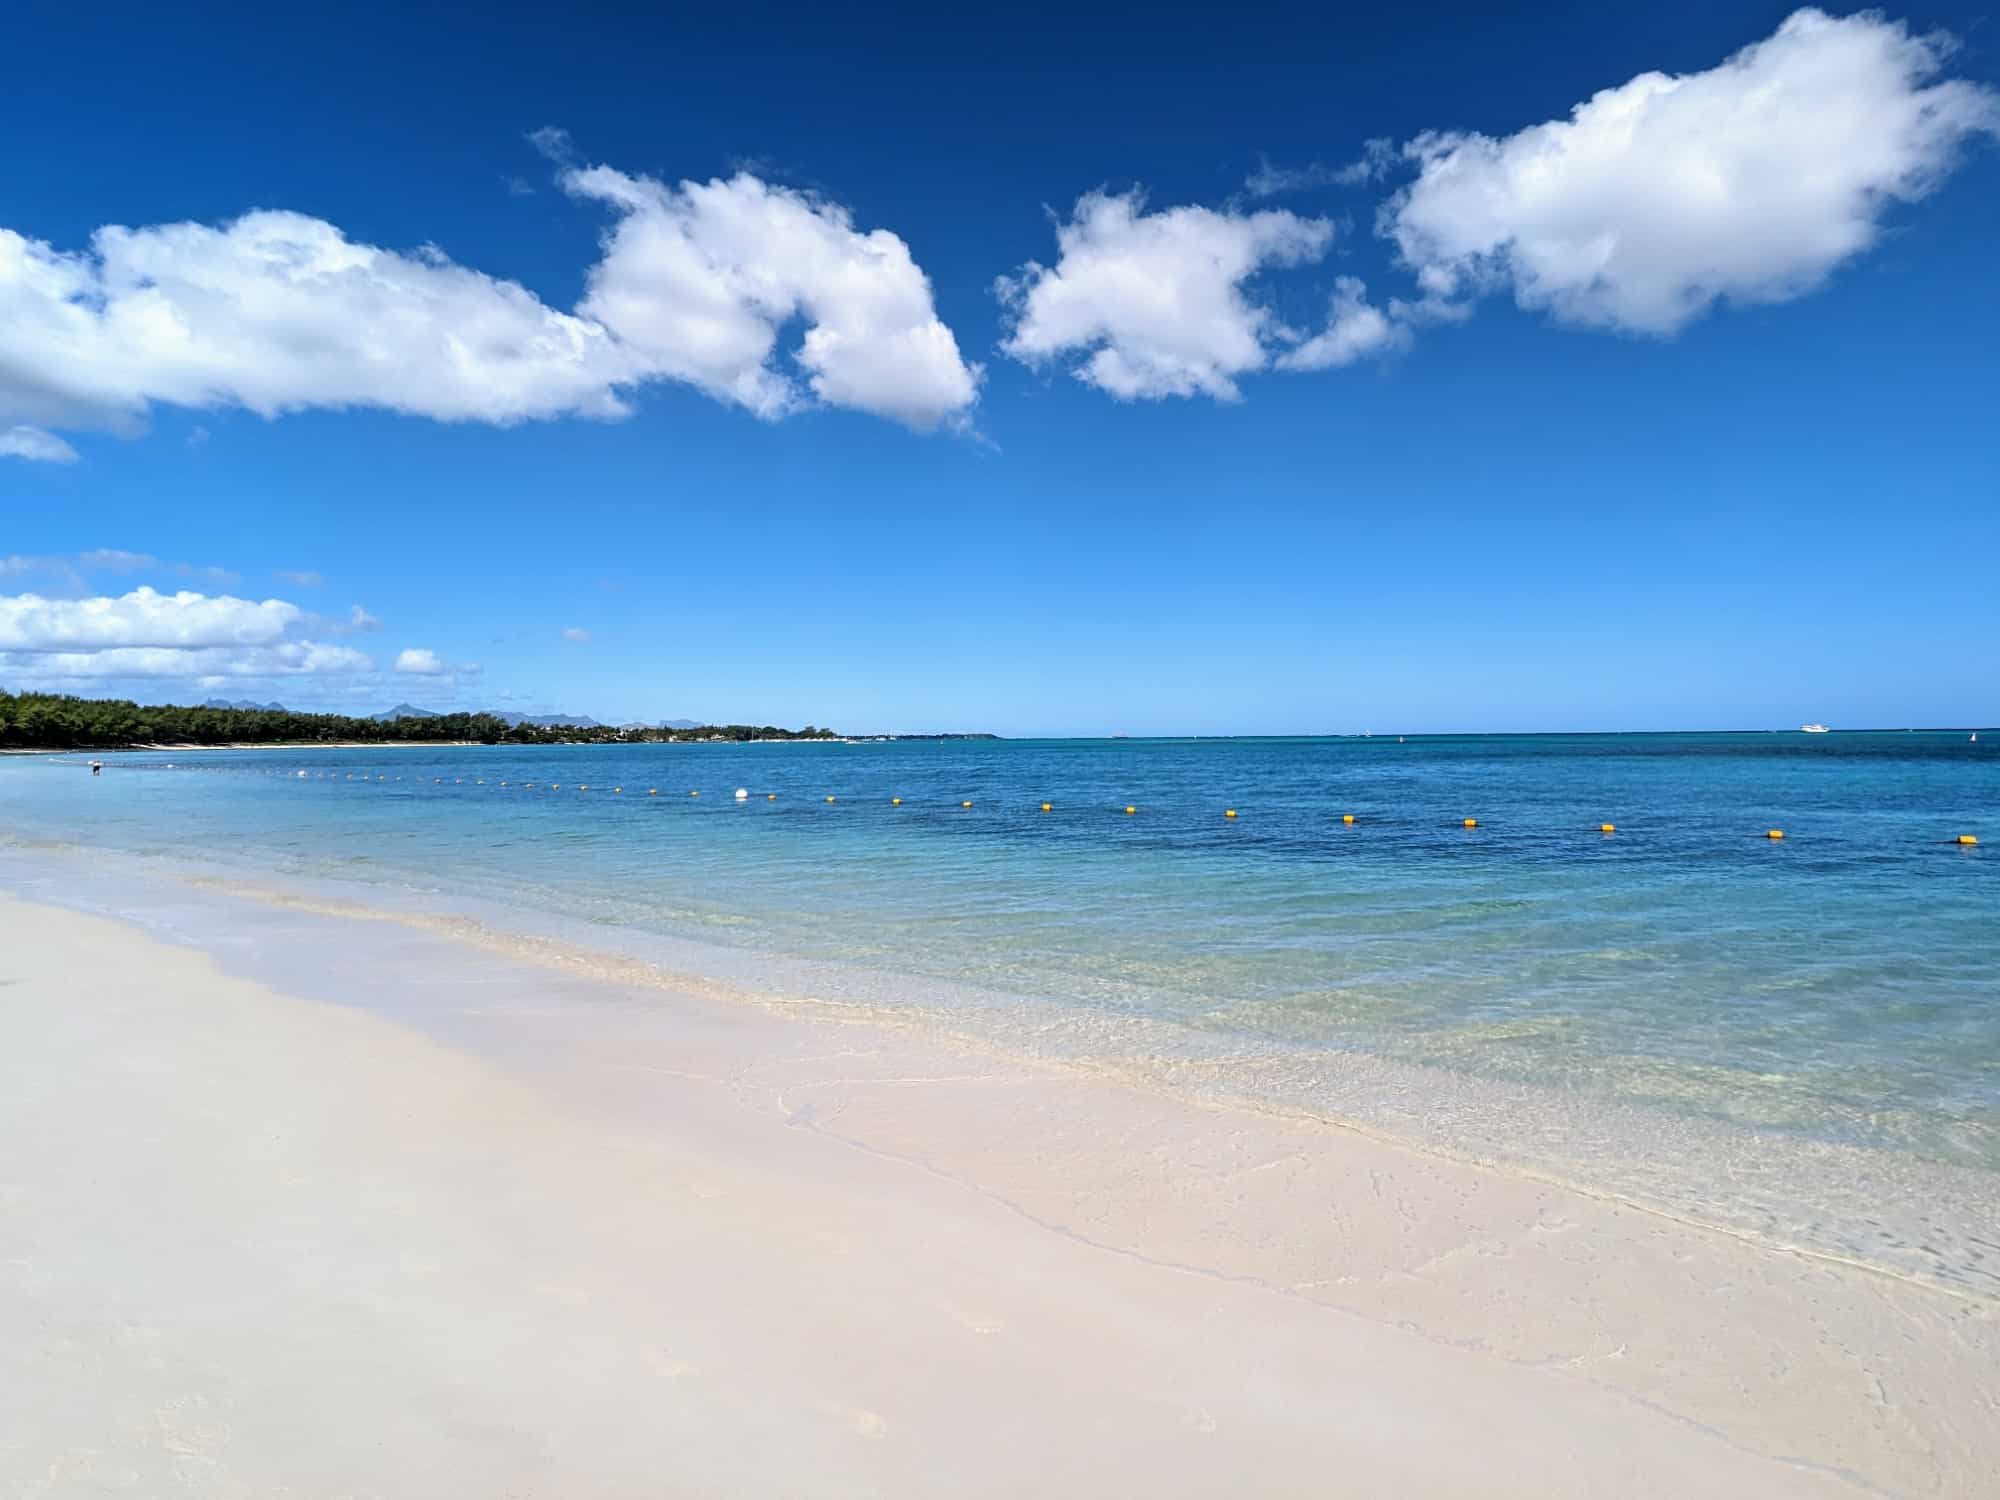 Beach and ocean in Mauritius, with small swimming buoys visible in foreground and a few puffy white clouds in blue sky